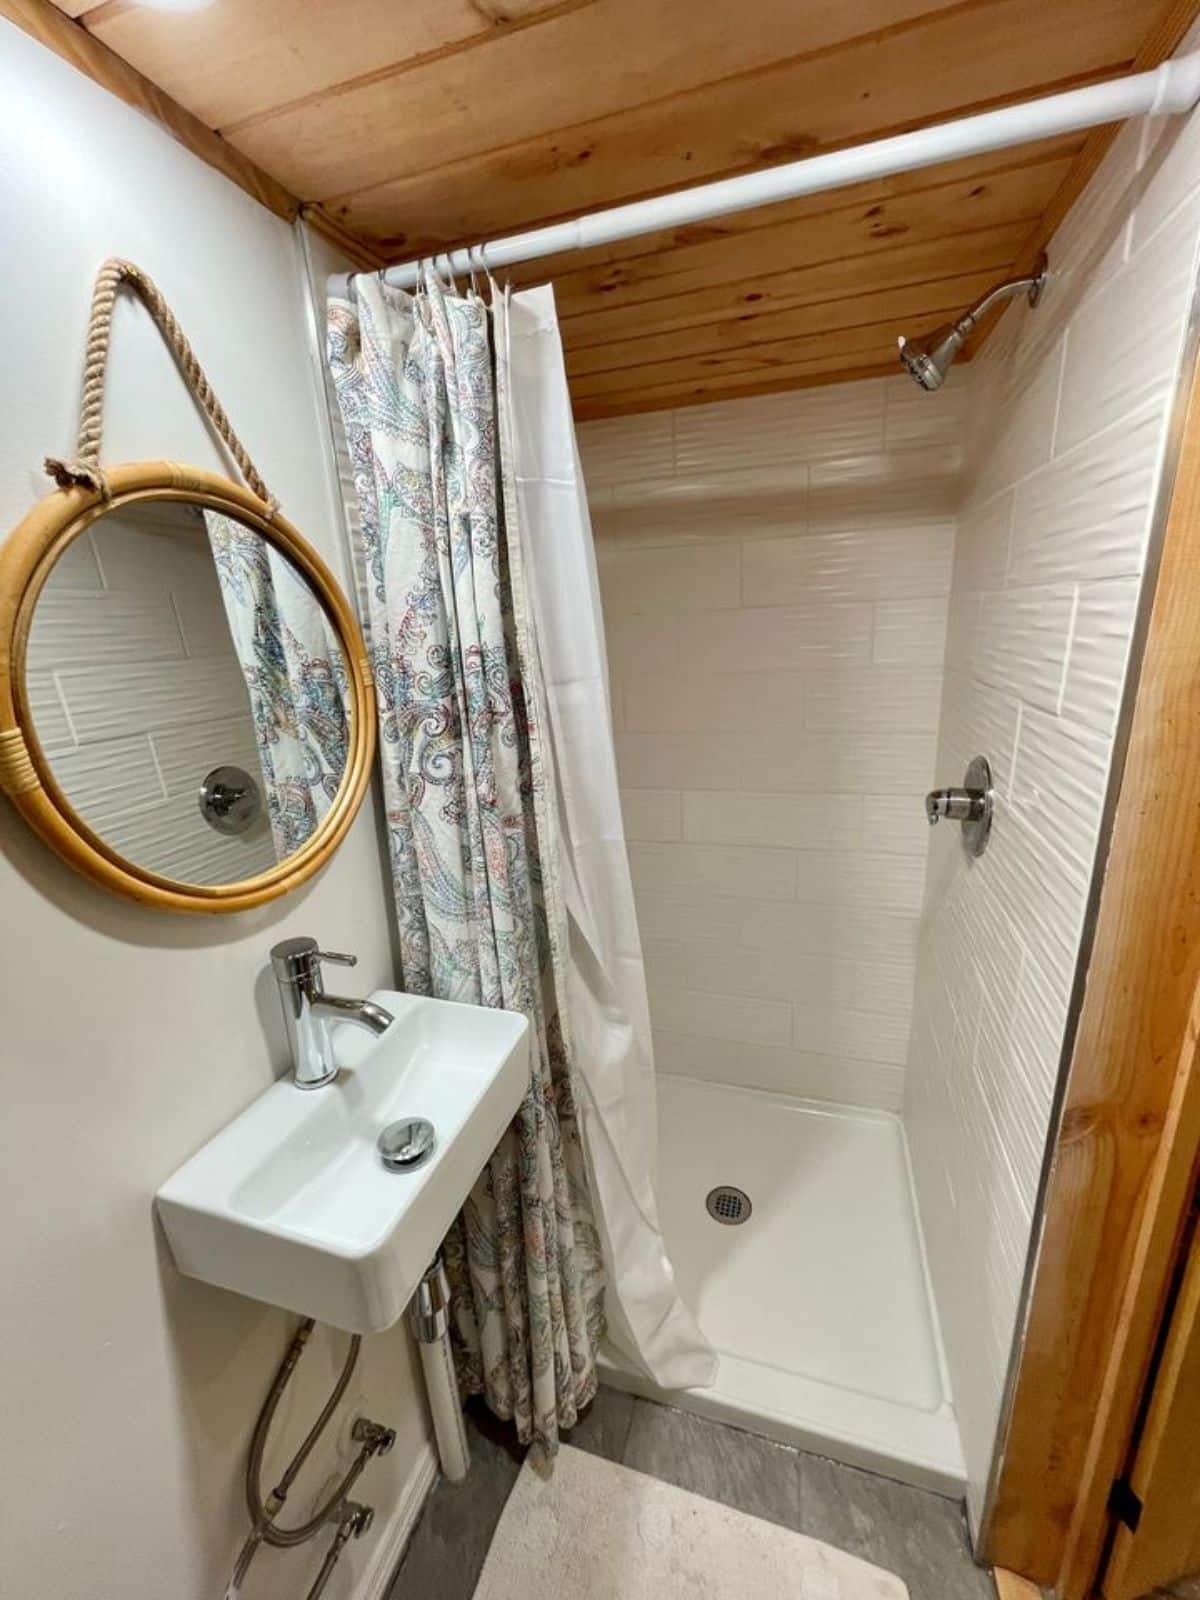 Separate shower area and sink and mirror in bathroom